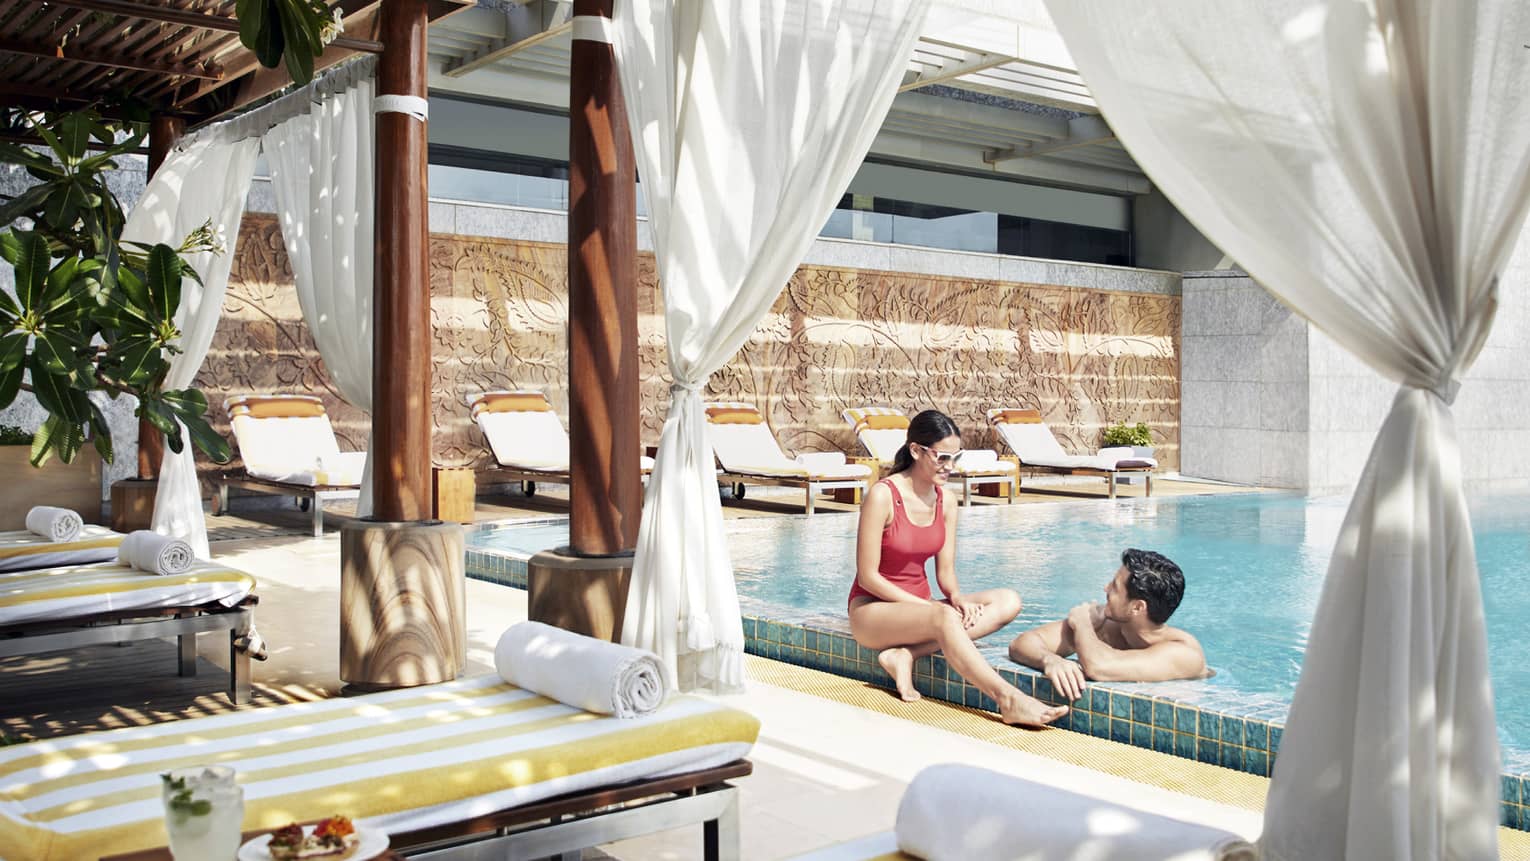 A couple lounges in the pool near a shaded cabana with fresh fruit